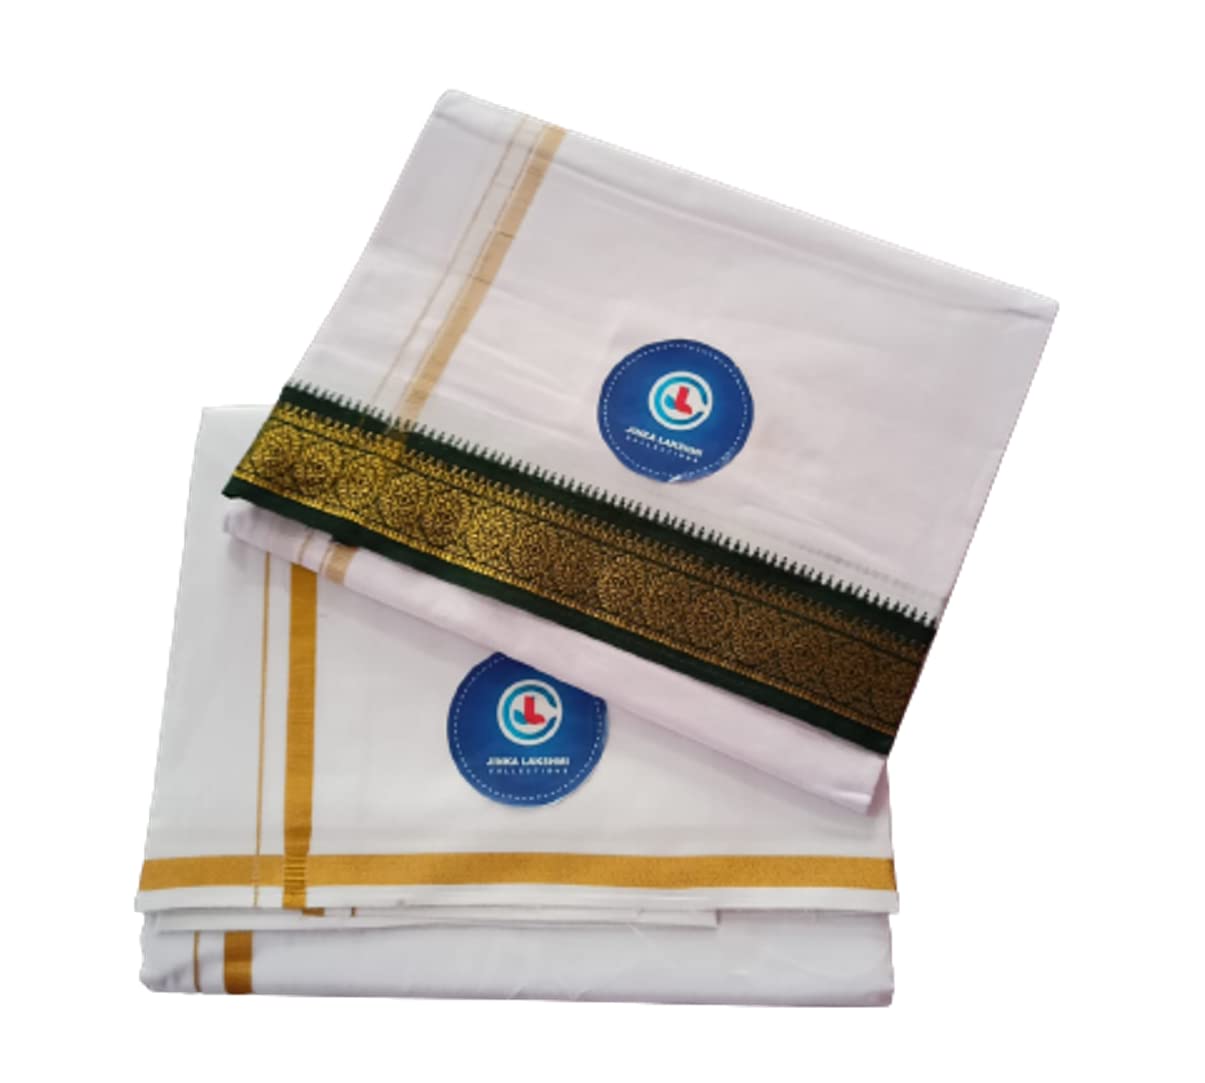 Jinka Lakshmi Collections Handloom Cotton White Dhoti 4 Meters Unstitched Pack of 2 (Multicolor-4)